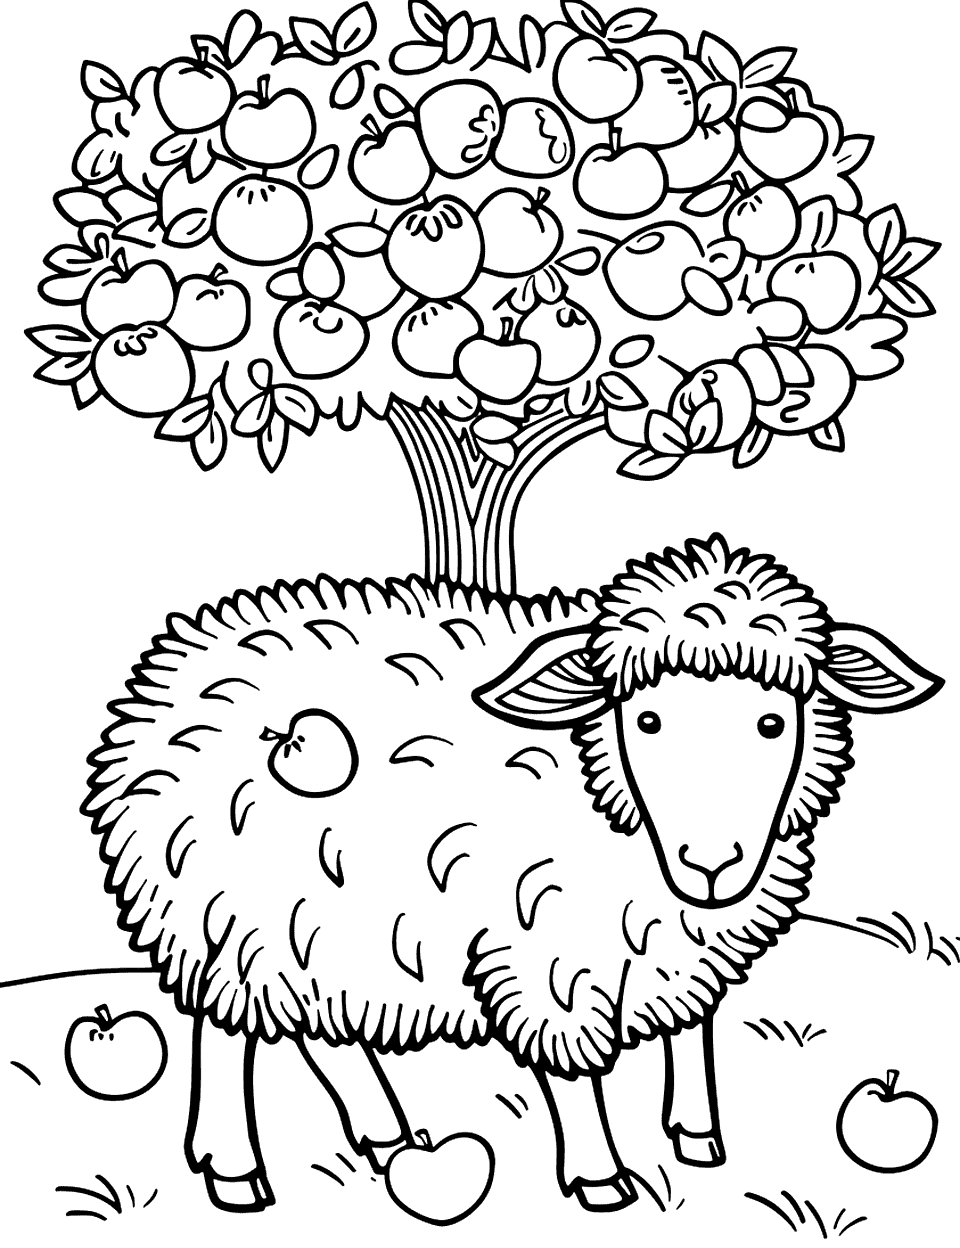 Sheep with Apples Coloring Page - A sheep ready to munch on apples fallen under an apple tree.